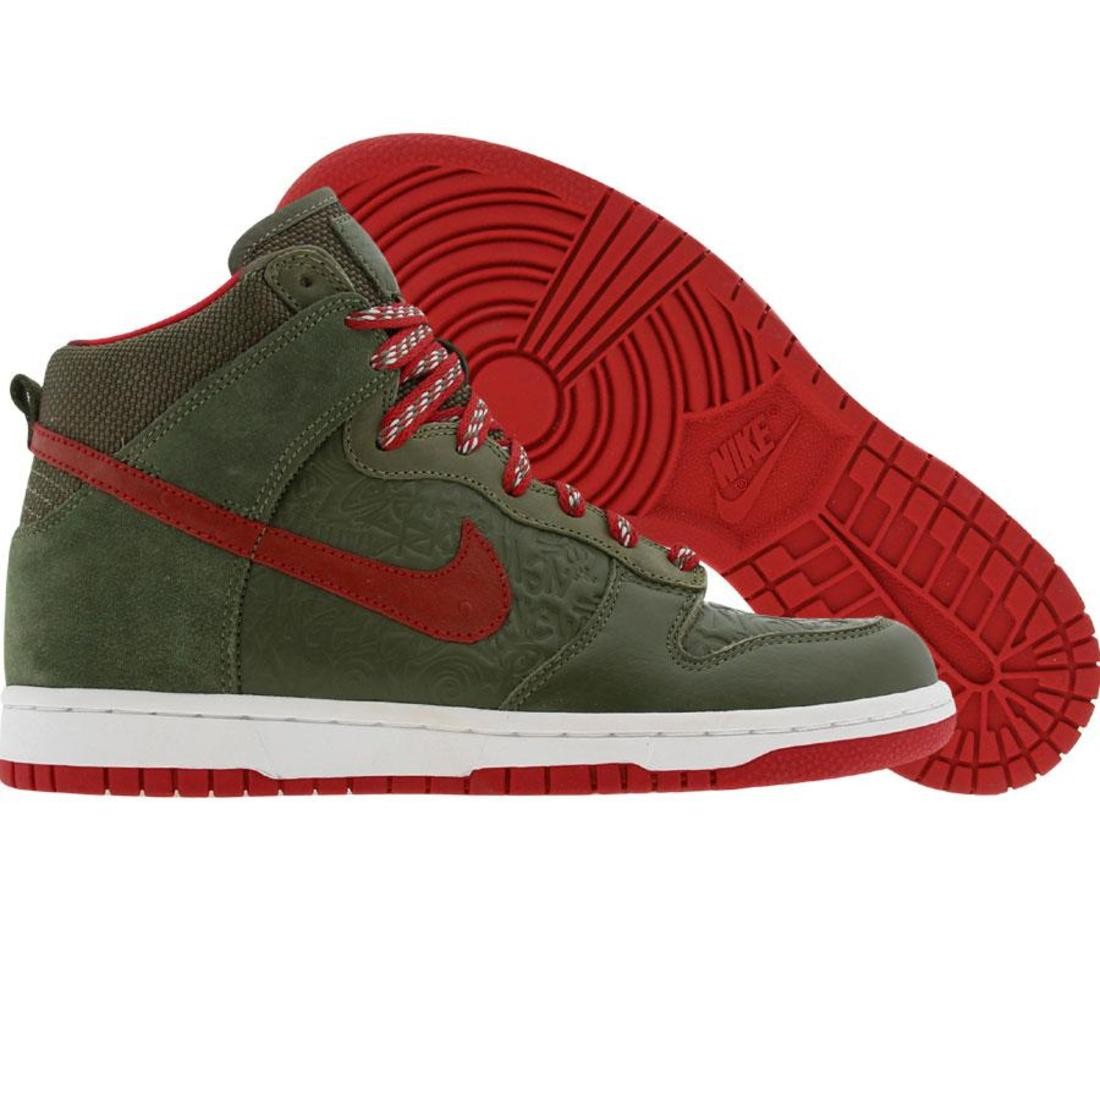 Nike Dunk High  2006 Stussy World Tour New York Edition  (army olive / army olive / varsity red)